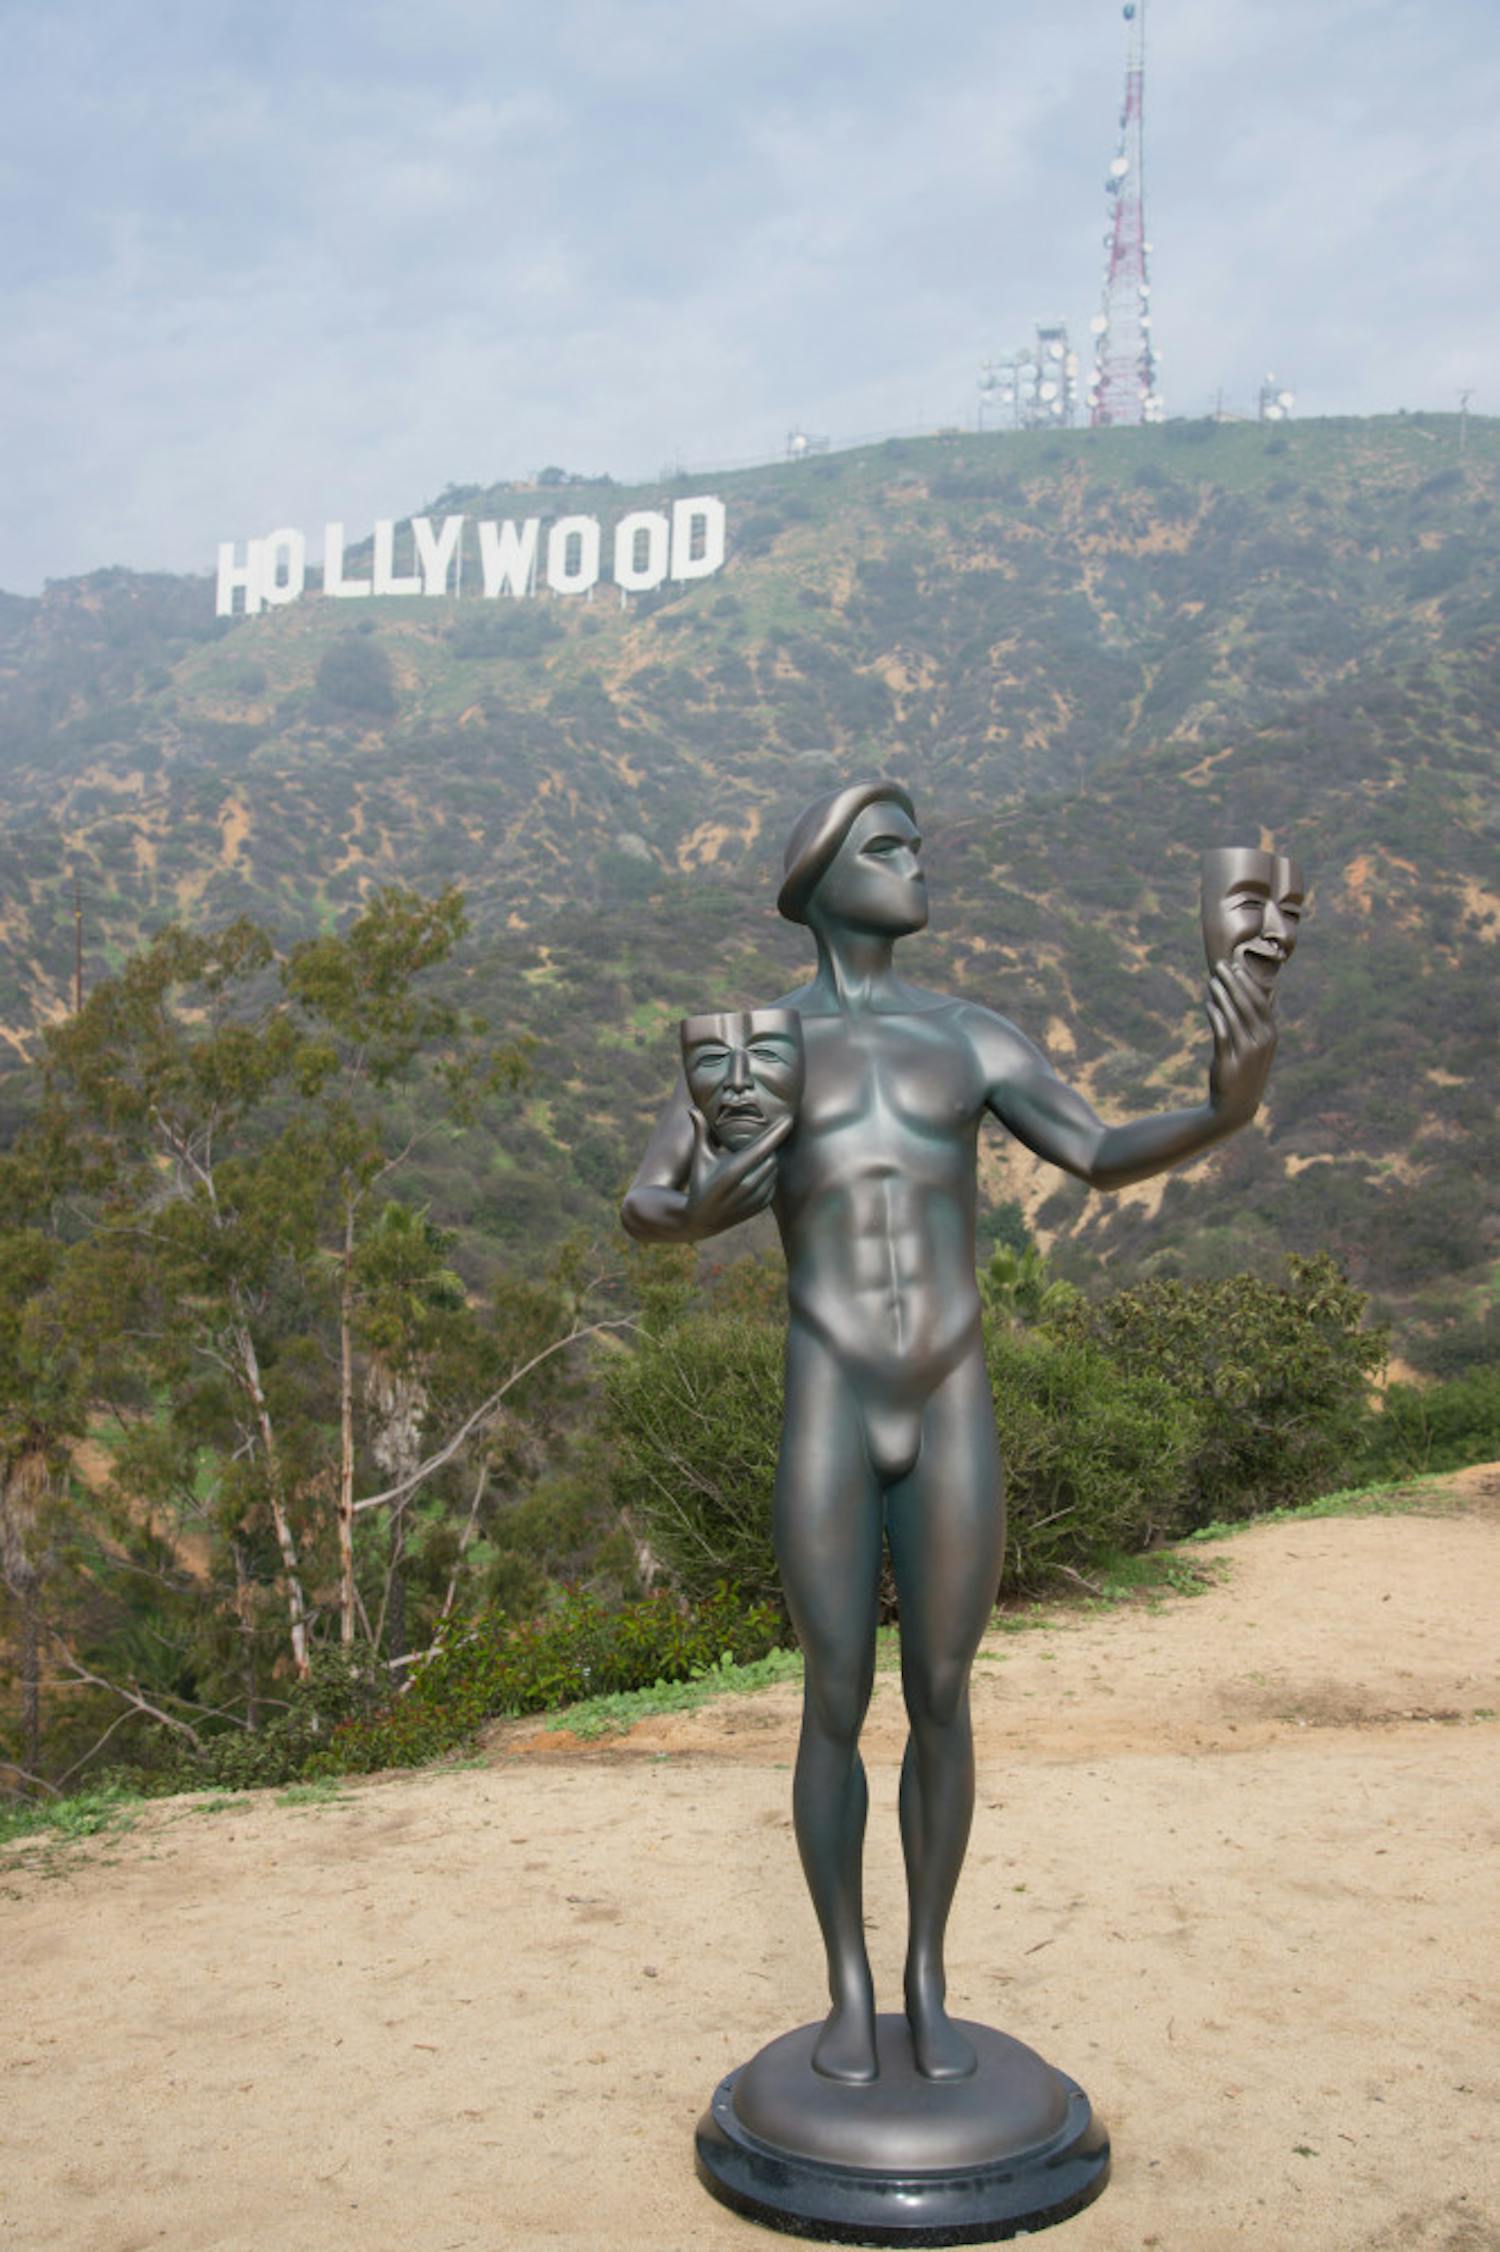 The Screen Actors Guild Awards actor statuette appears near the Hollywood Sign on Tuesday, Jan 20, 2015, in Los Angeles. The SAG awards will be presented on Jan. 25. (Photo by Rob Latour/Invision/AP)